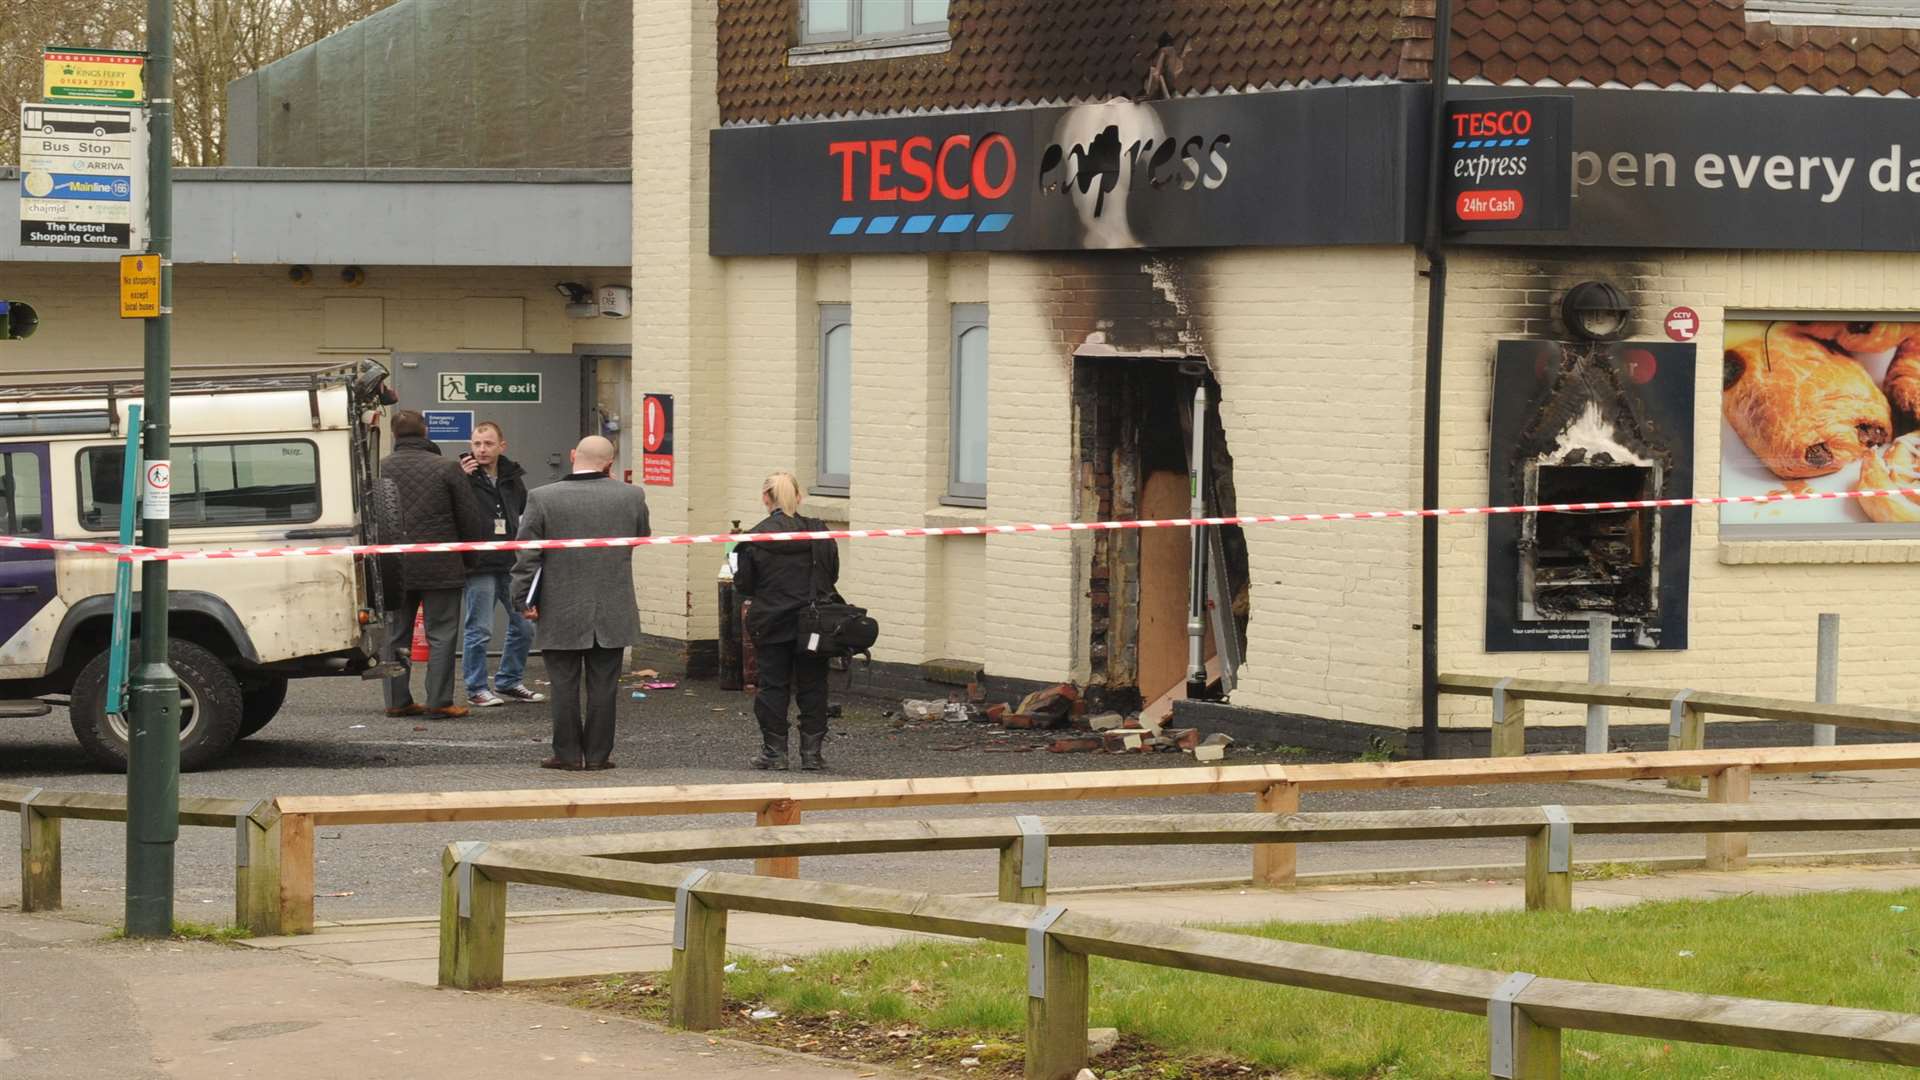 The scene of the raid at the Tesco store in Kestrel Road, Lordswood